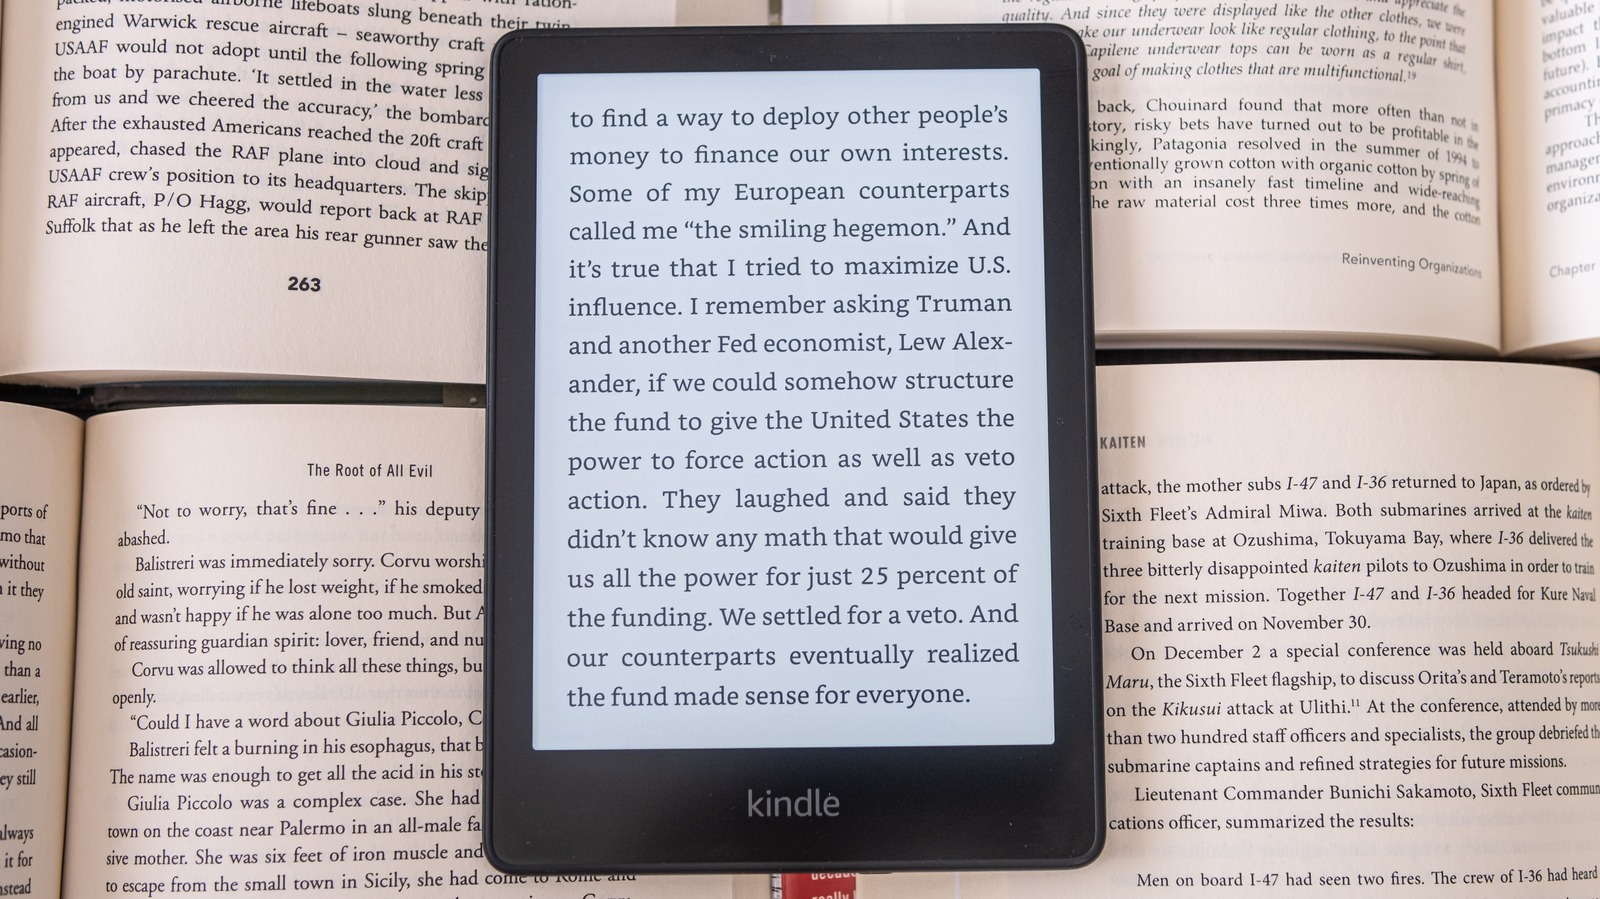 Do You Think the Next Kindle Should Have a Have Color-Shifting Frontlight?  - The Digital Reader